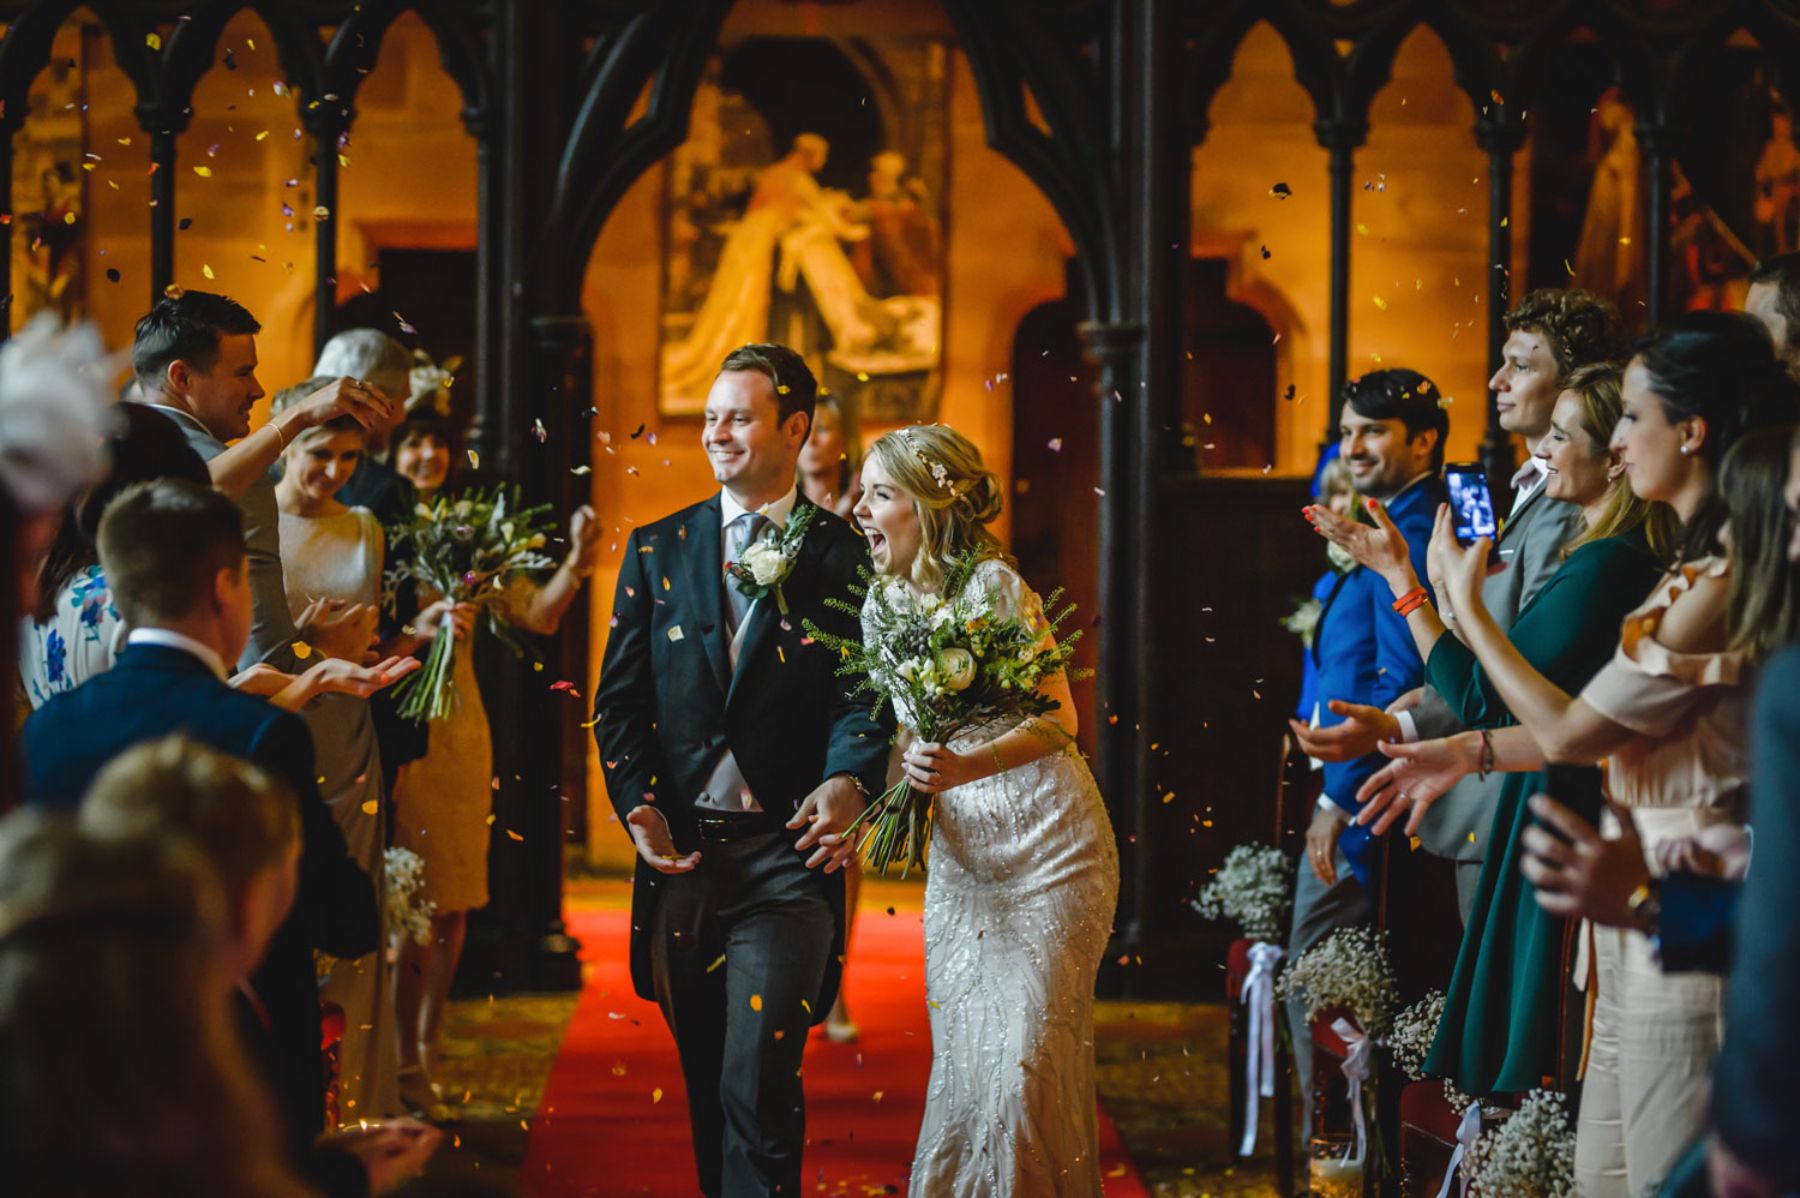 Bride and groom smiling as guests throw confetti